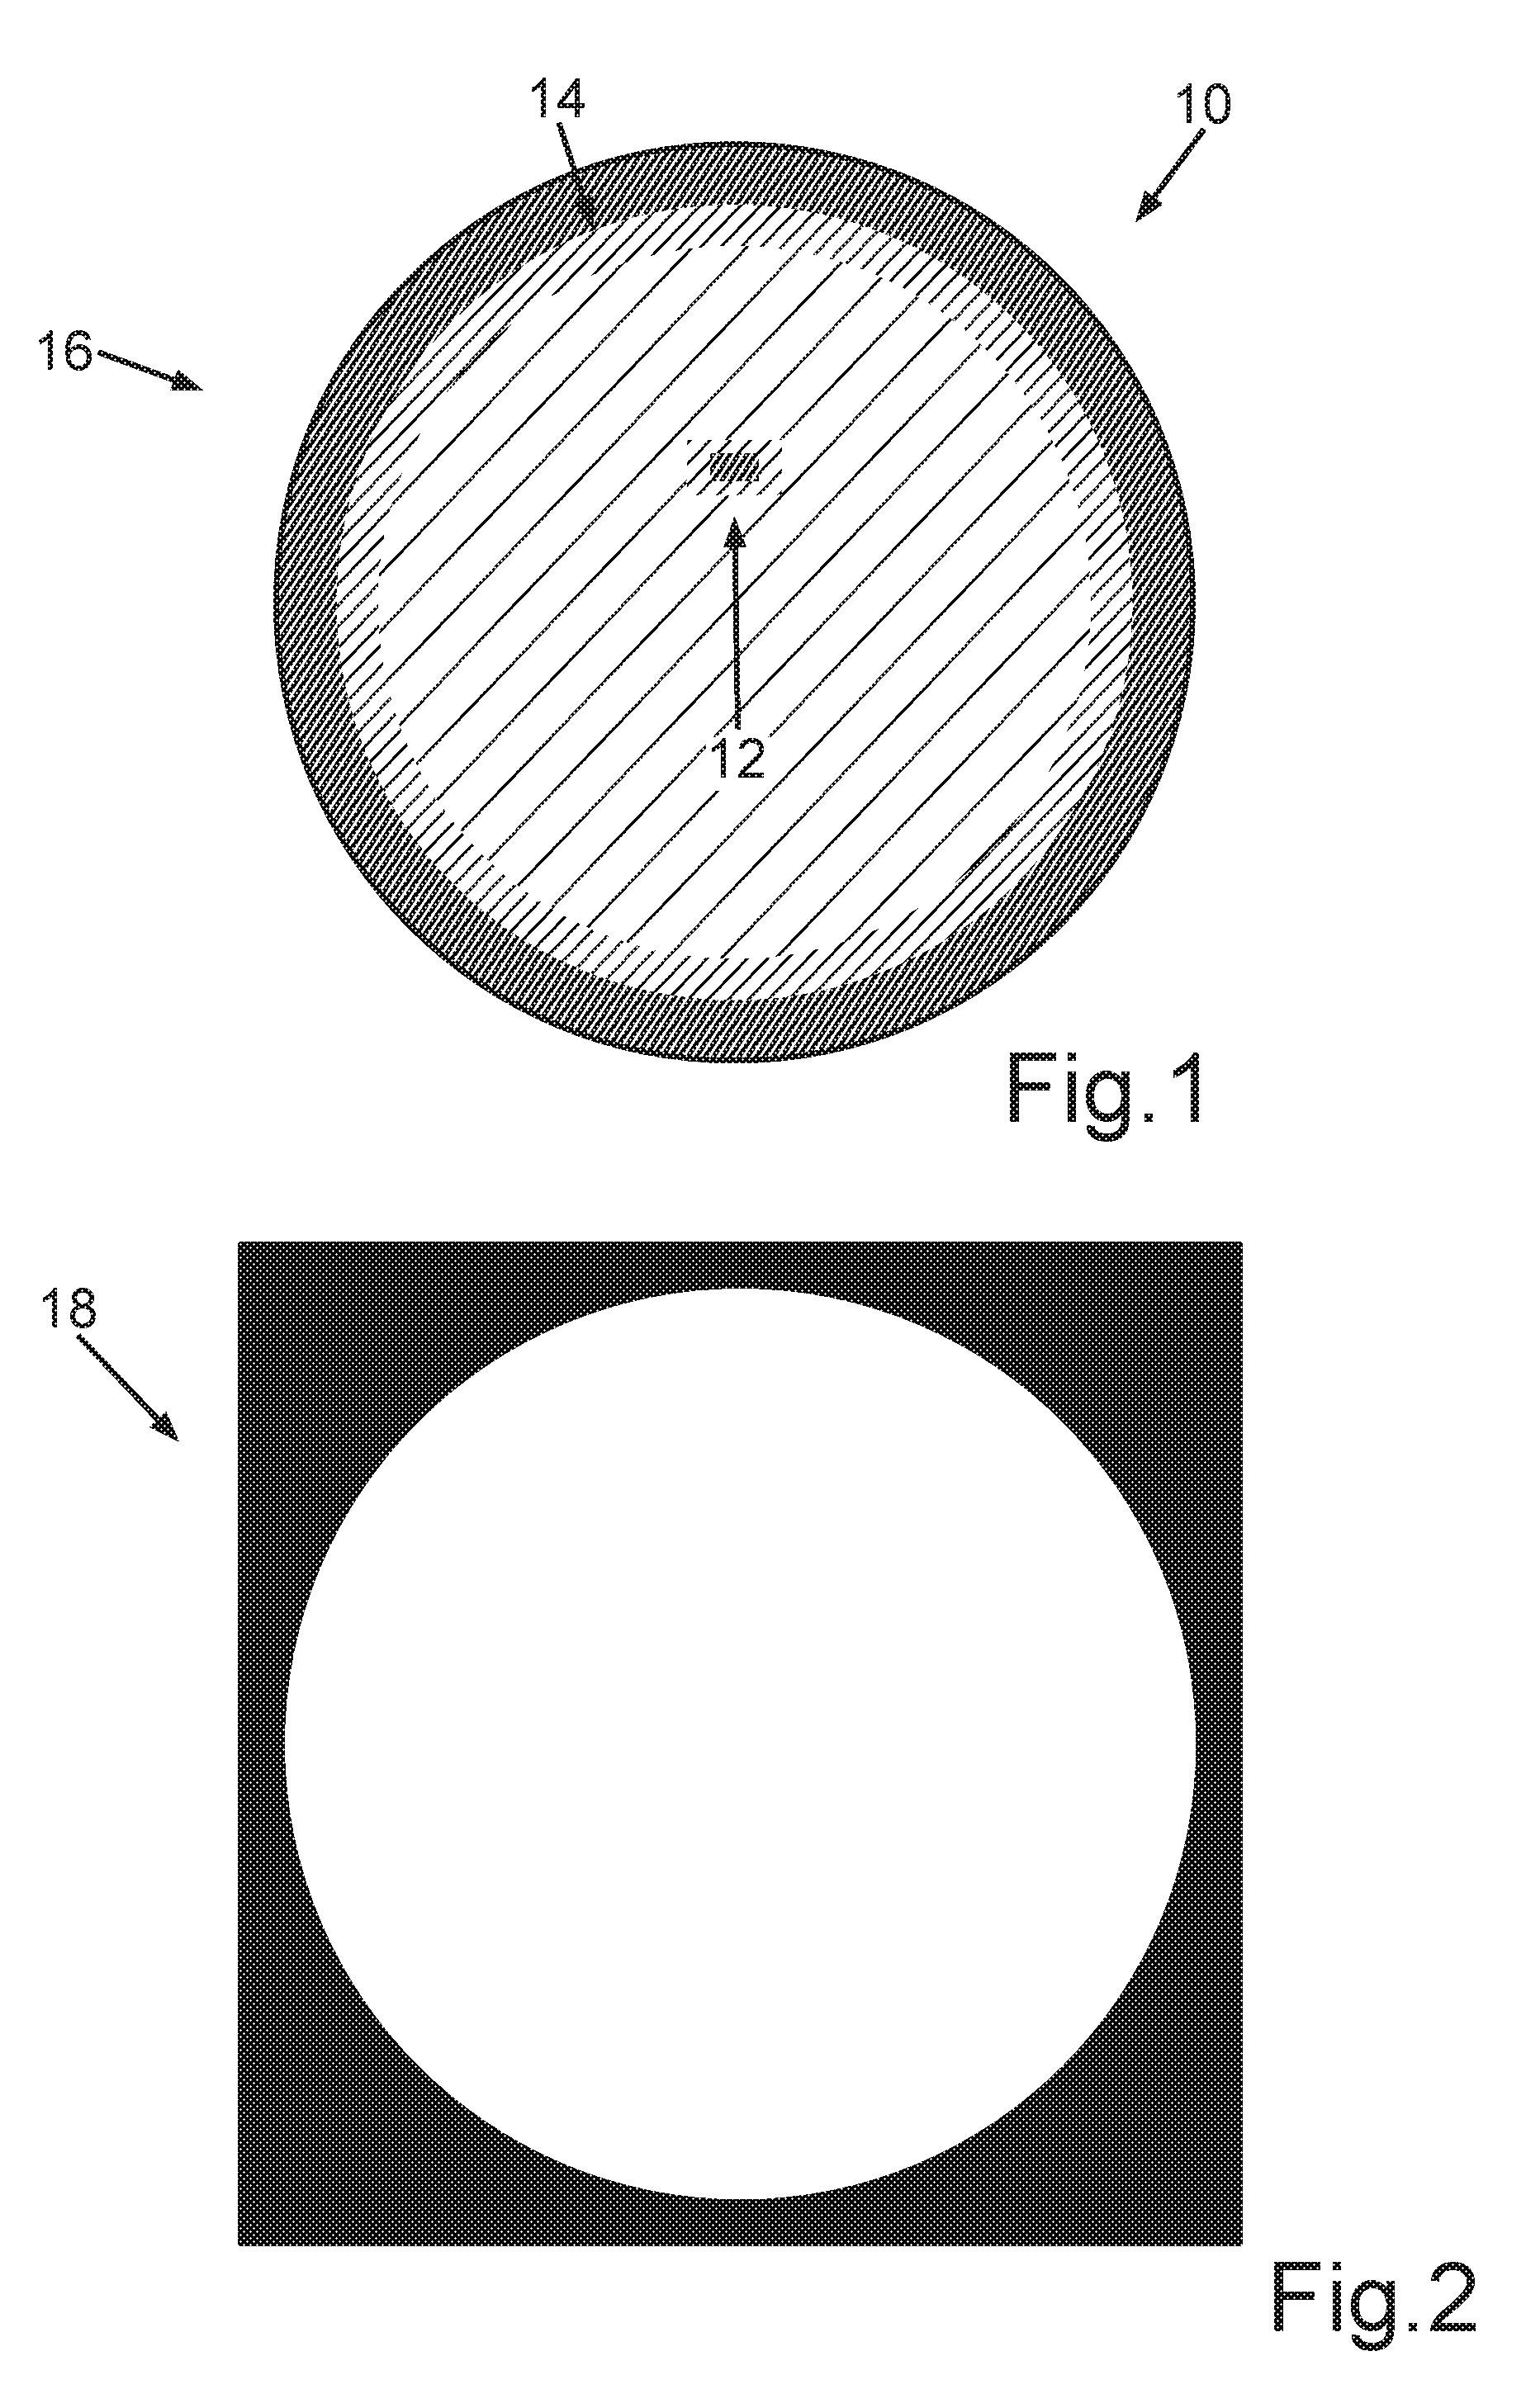 Method and device for the quality evaluation of a component produced by means of an additive manufacturing method